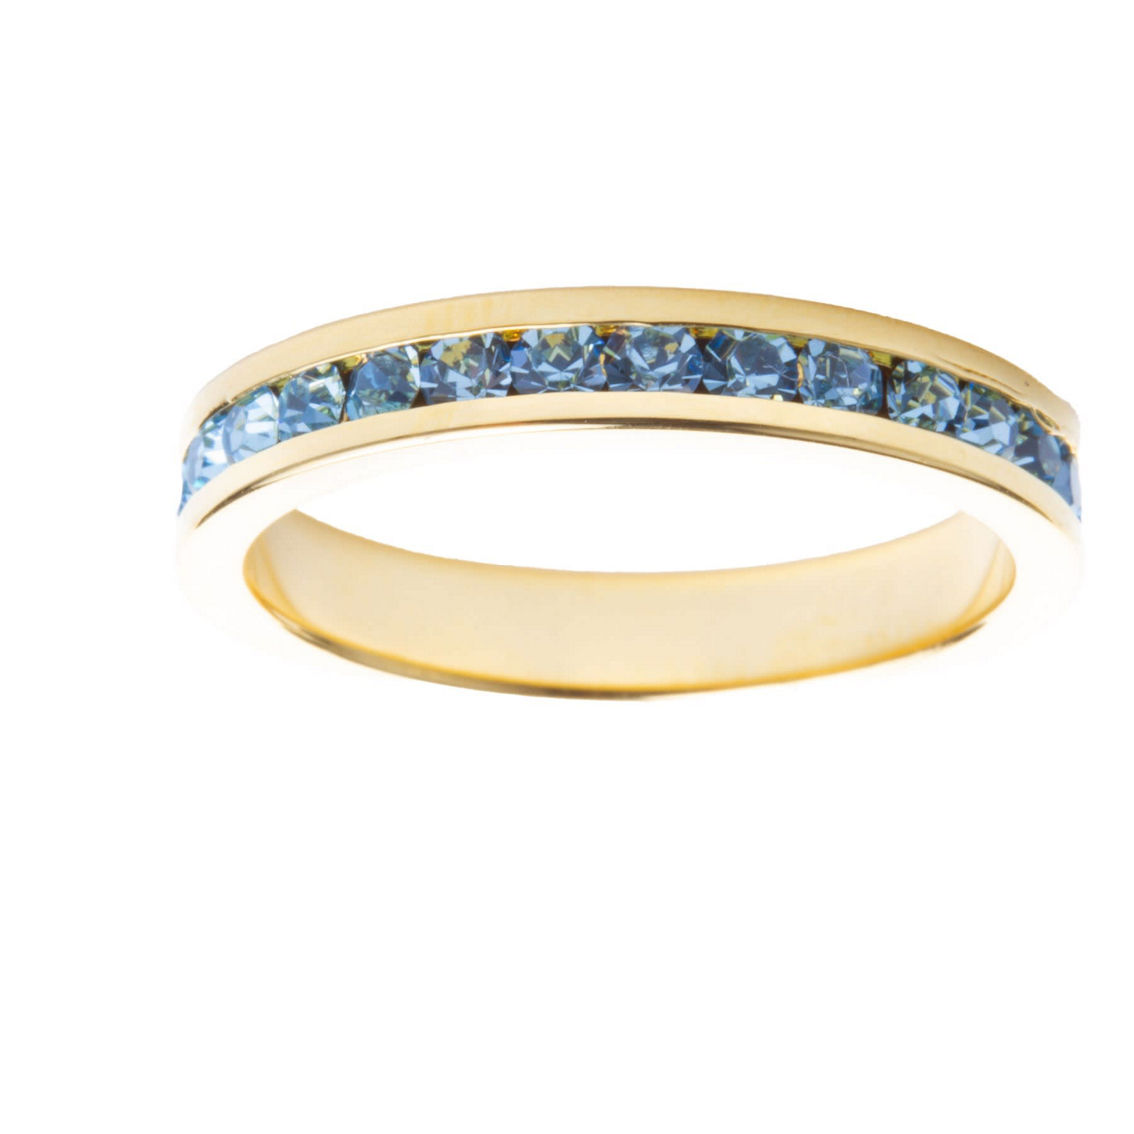 18K Gold over Sterling Silver Birthstone Eternity Ring - Image 2 of 2